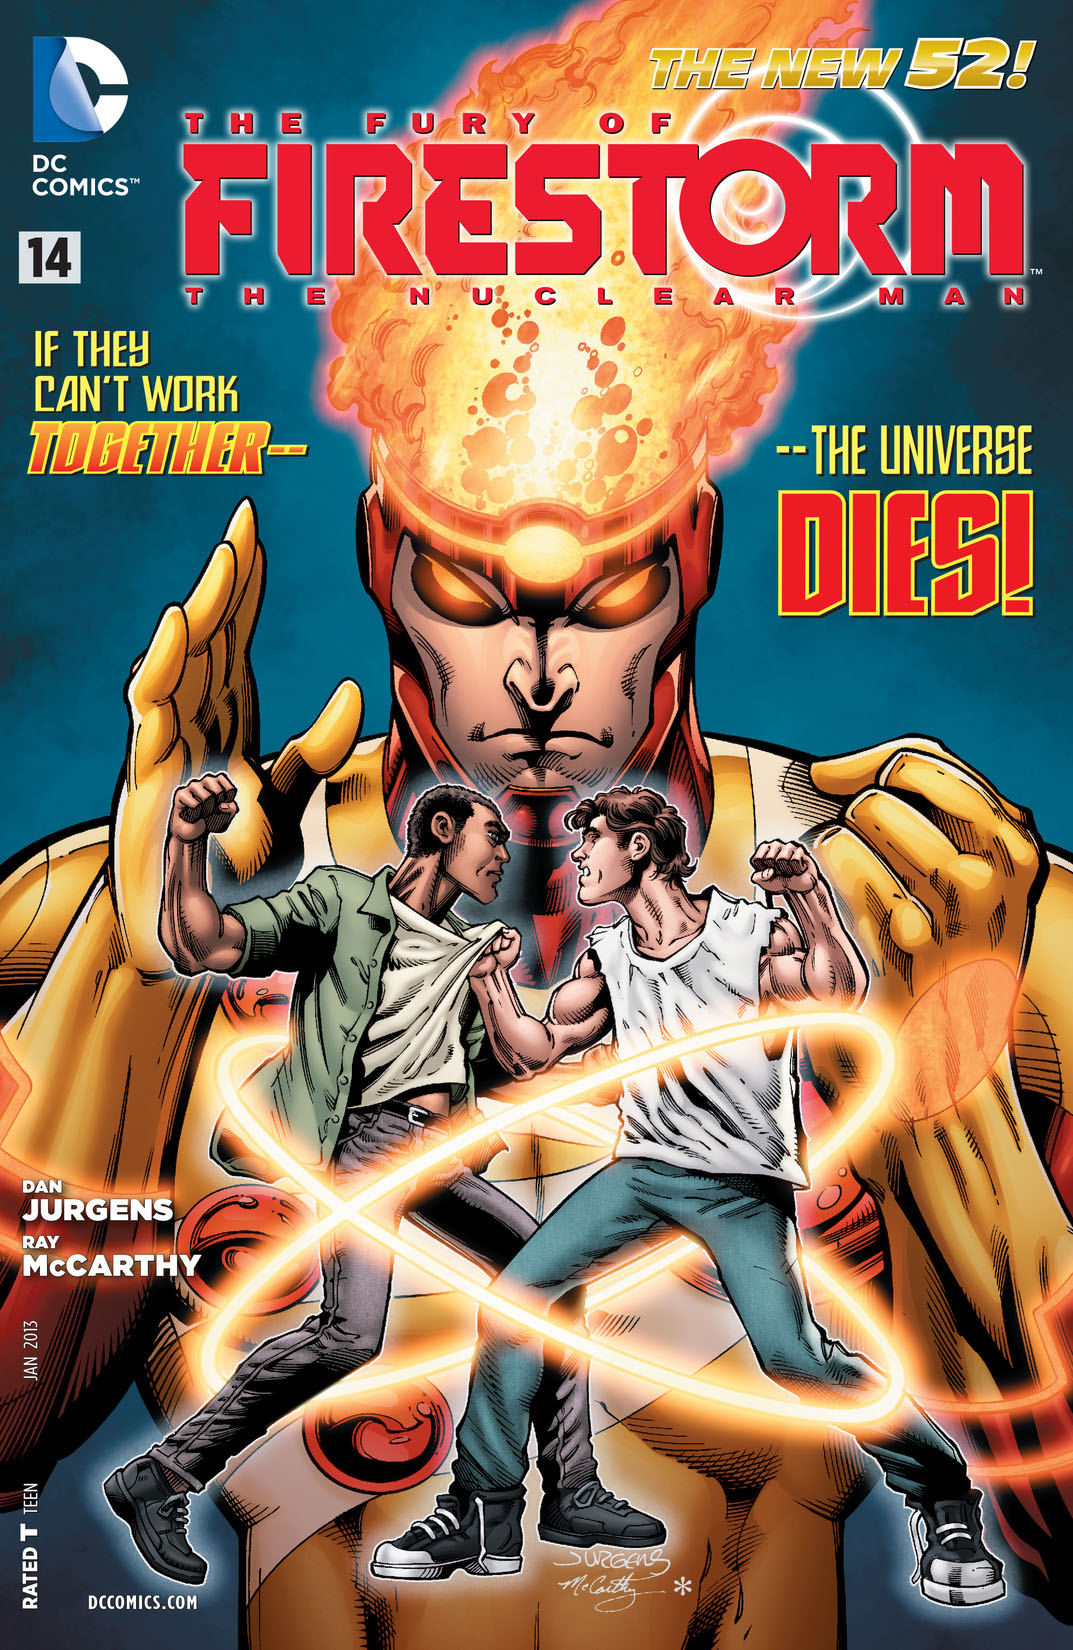 The Fury of Firestorm: The Nuclear Man #14 preview images